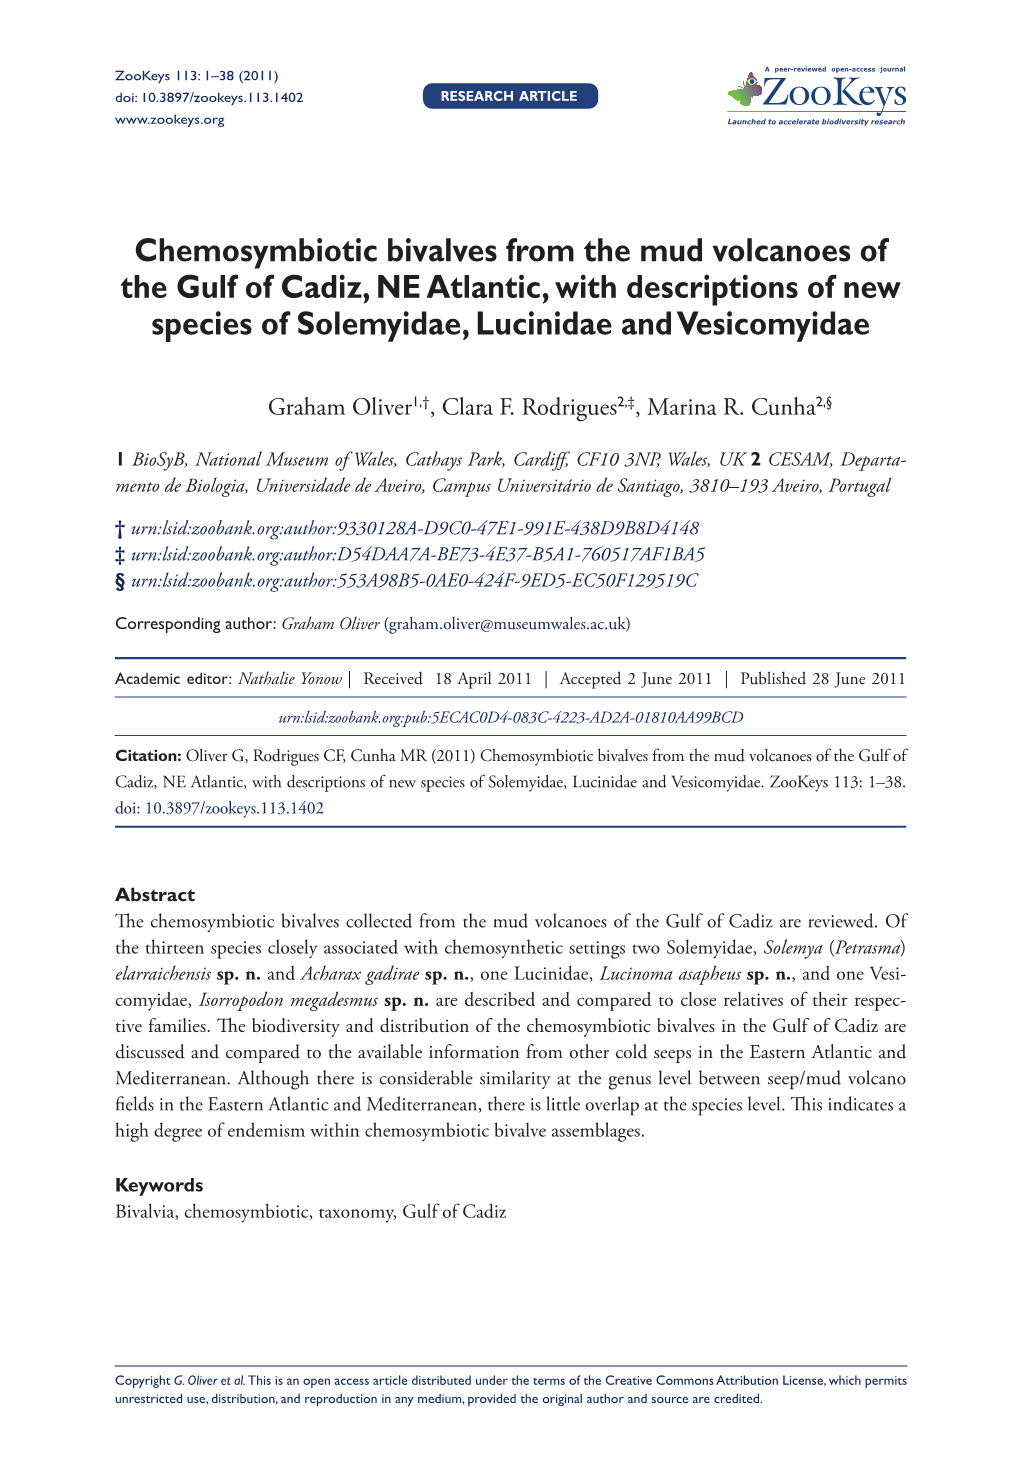 Chemosymbiotic Bivalves from the Mud Volcanoes of the Gulf of Cadiz, NE Atlantic, with Descriptions of New Species of Solemyidae, Lucinidae and Vesicomyidae